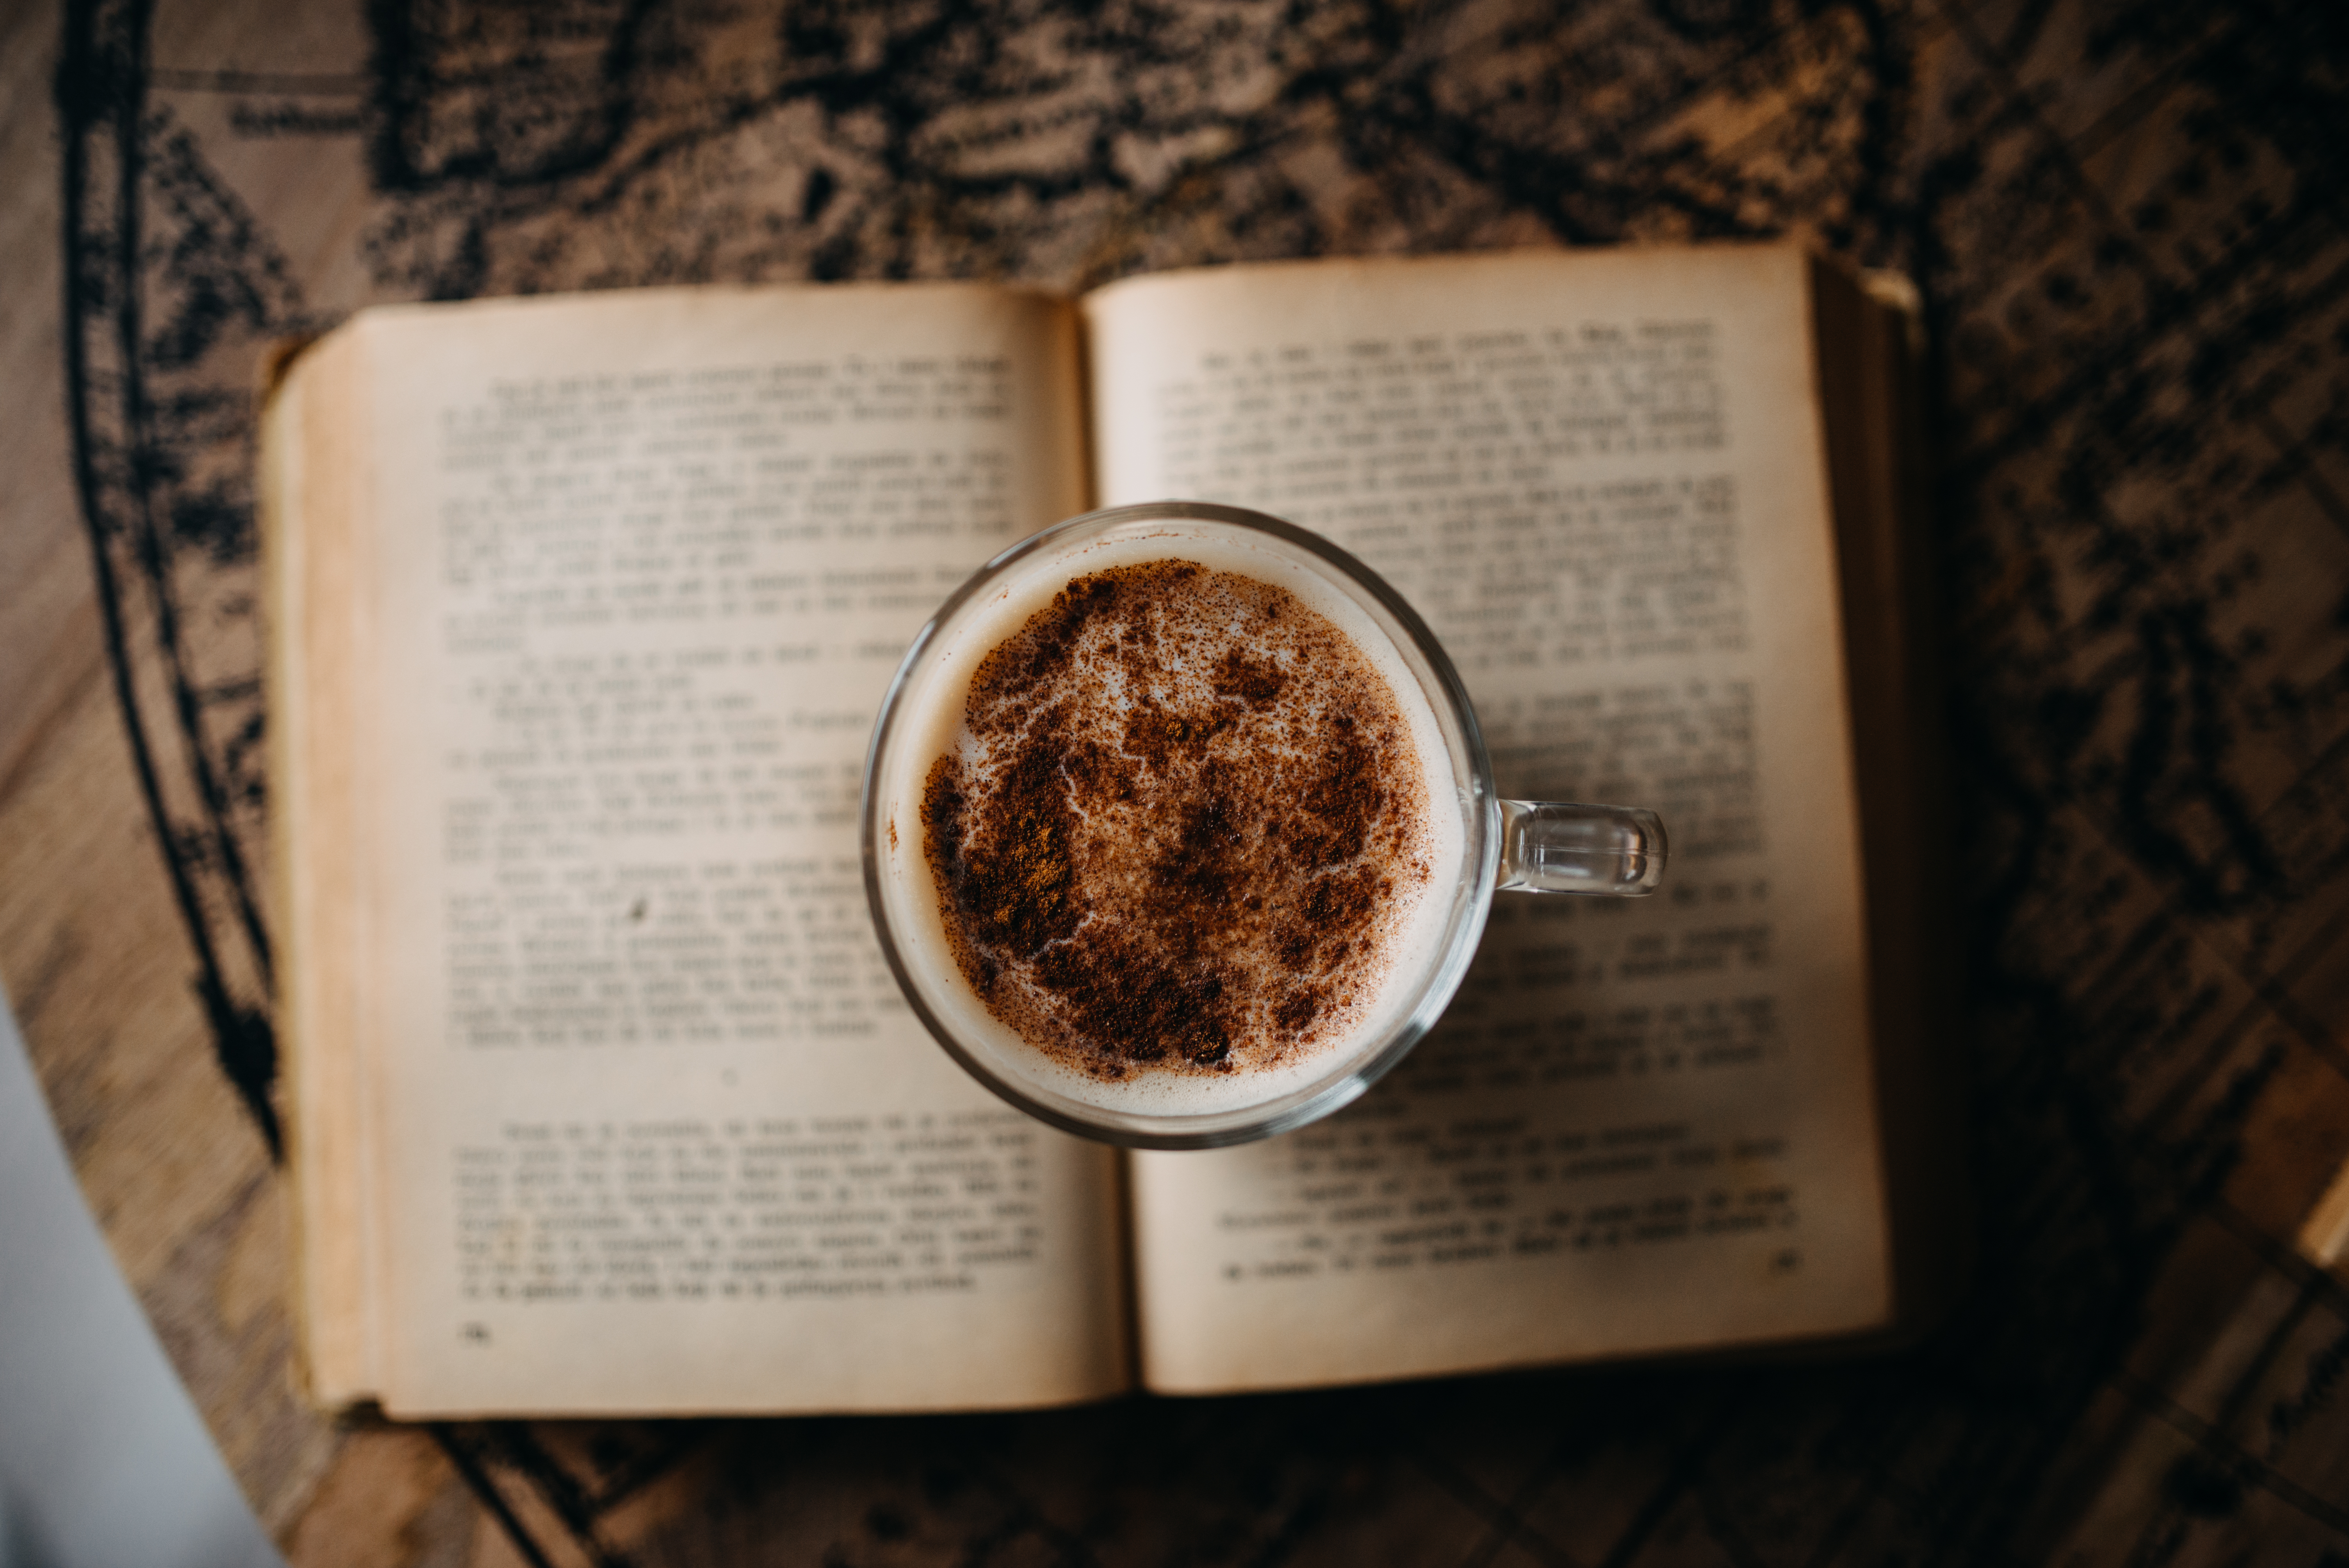 PC Wallpapers coffee, food, cup, book, cappuccino, drink, beverage, mug